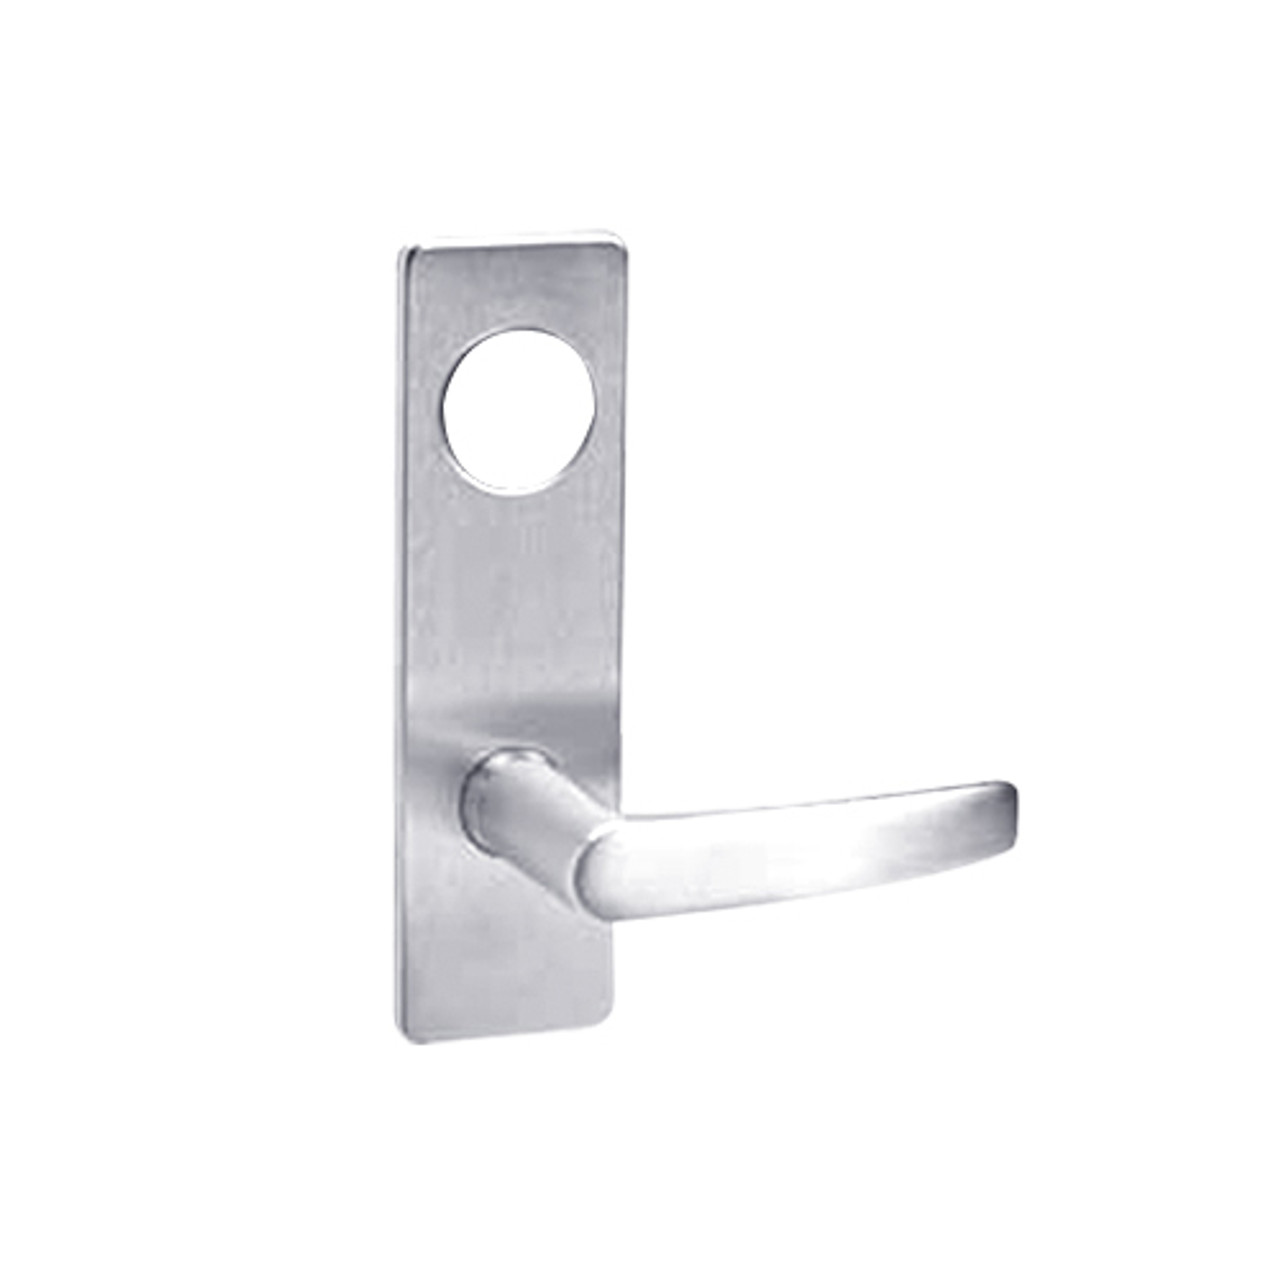 ML2048-ASM-625-CL7 Corbin Russwin ML2000 Series IC 7-Pin Less Core Mortise Entrance Locksets with Armstrong Lever in Bright Chrome